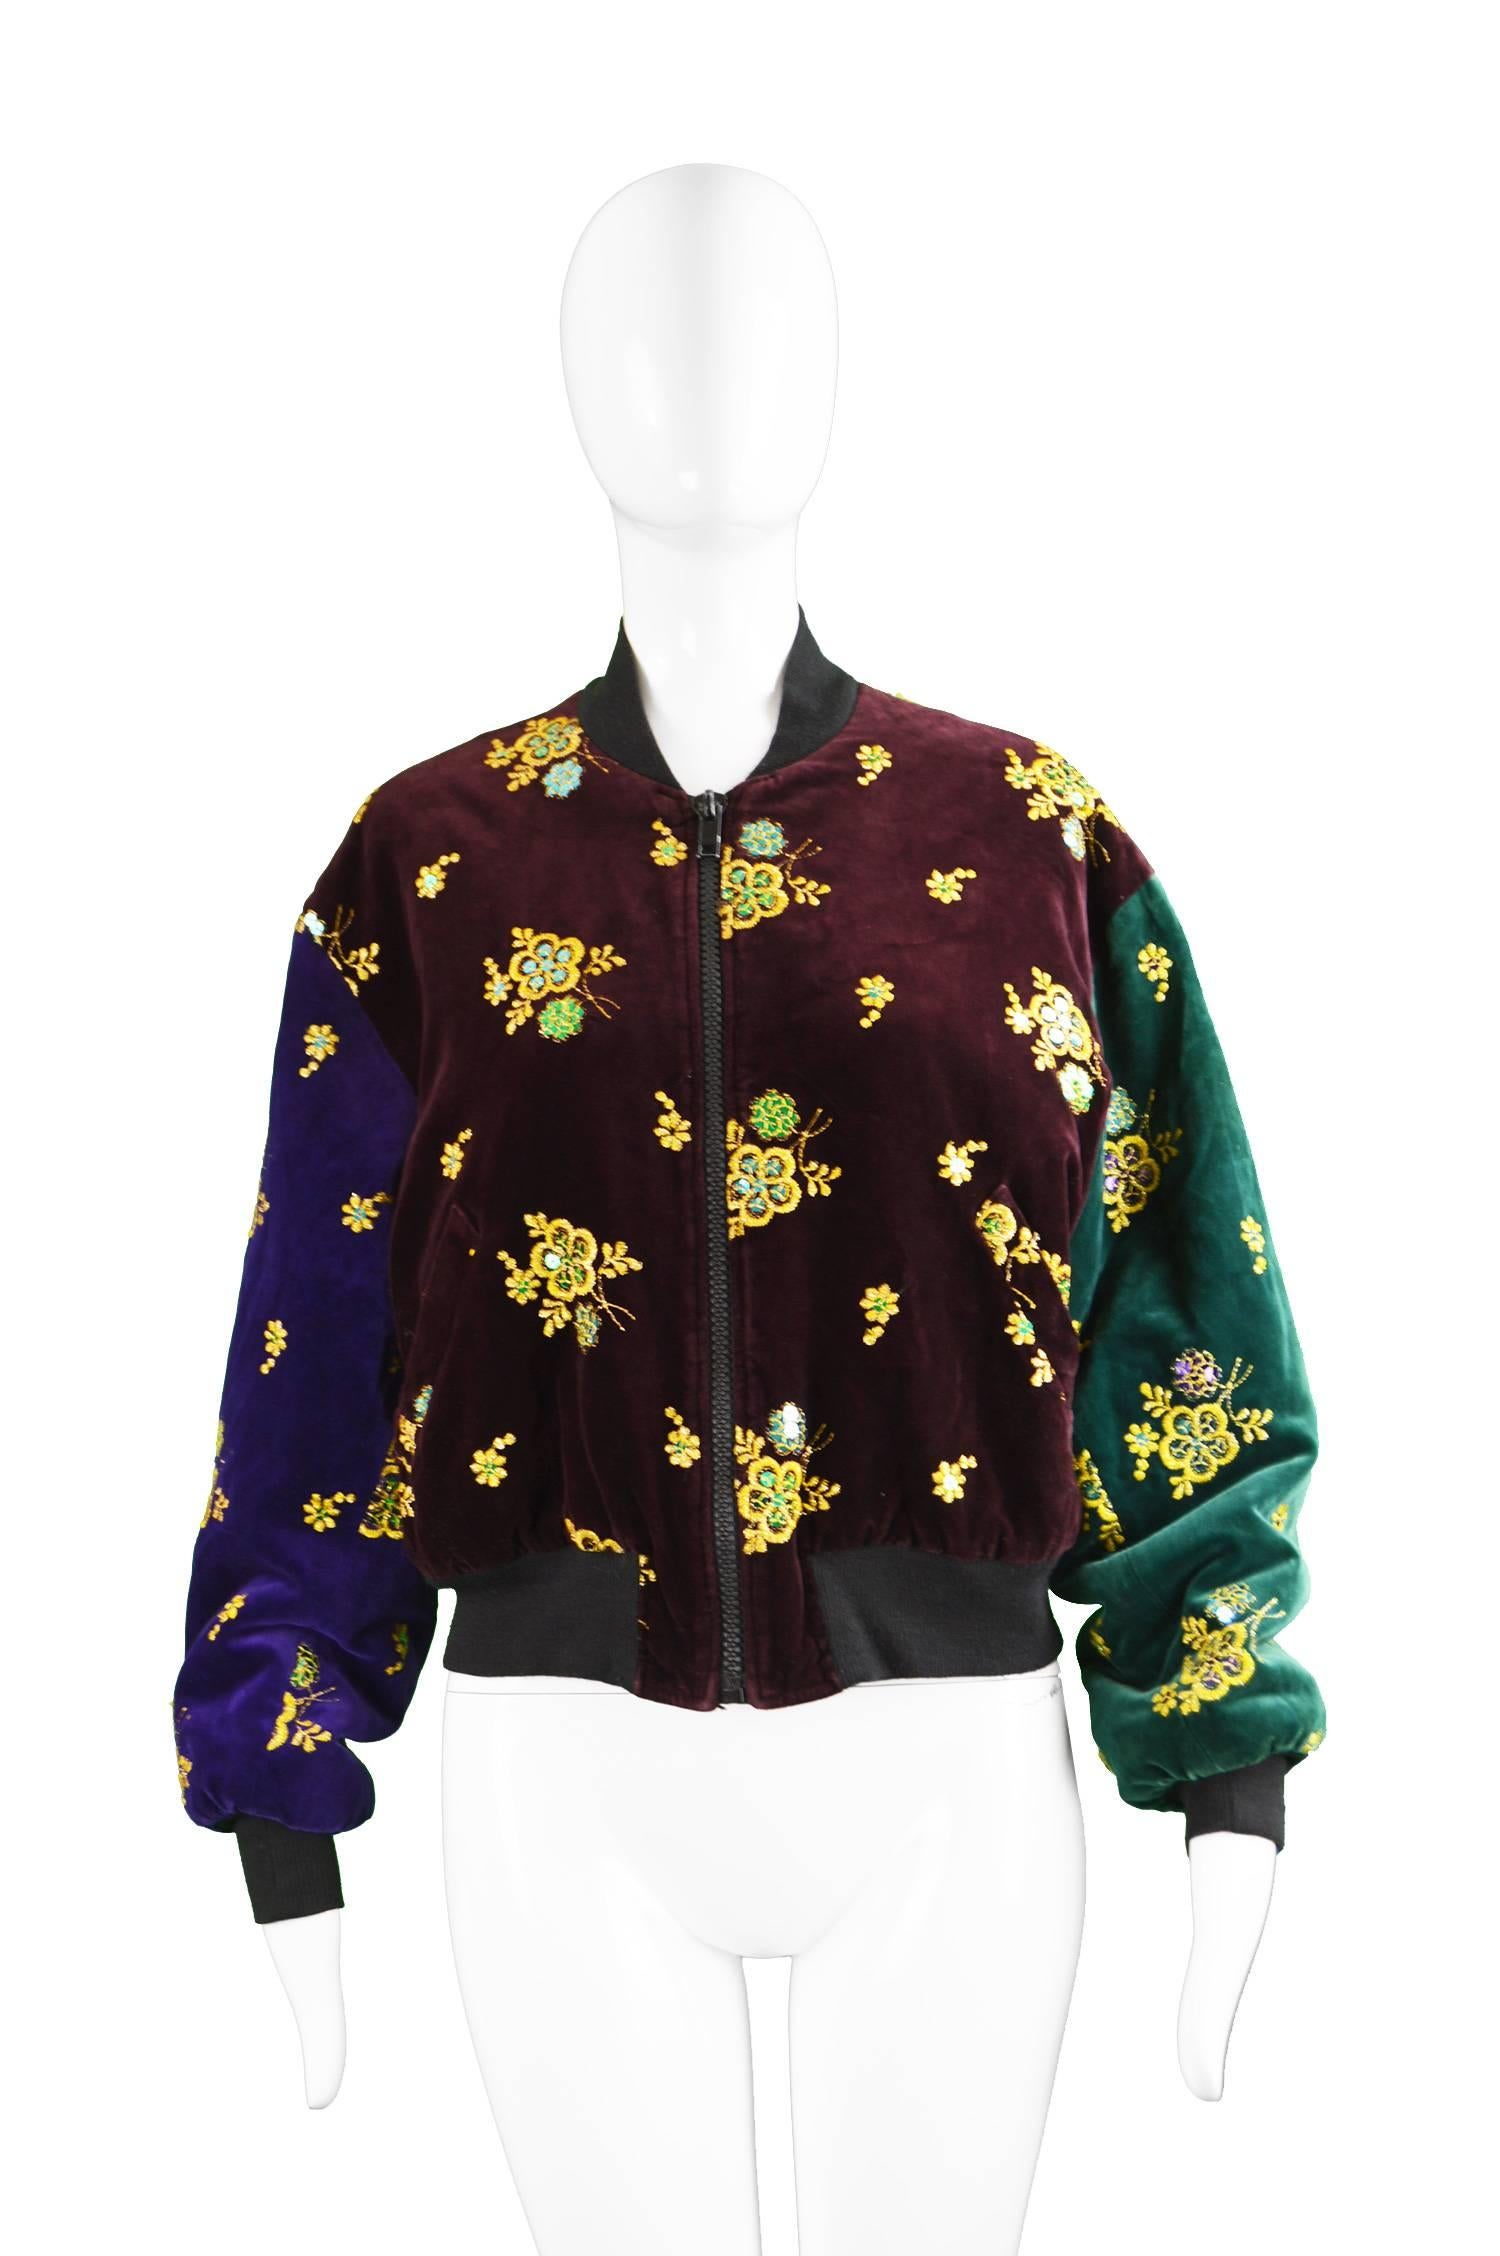 A beautiful womens vintage bomber jacket from the 90s by luxury Italian designer, Rifat Ozbek. Made in Italy, this high quality jacket has gold lamé embroidery and sequins throughout luxurious velvet in blocks of green, burgundy and purple. 

Size: